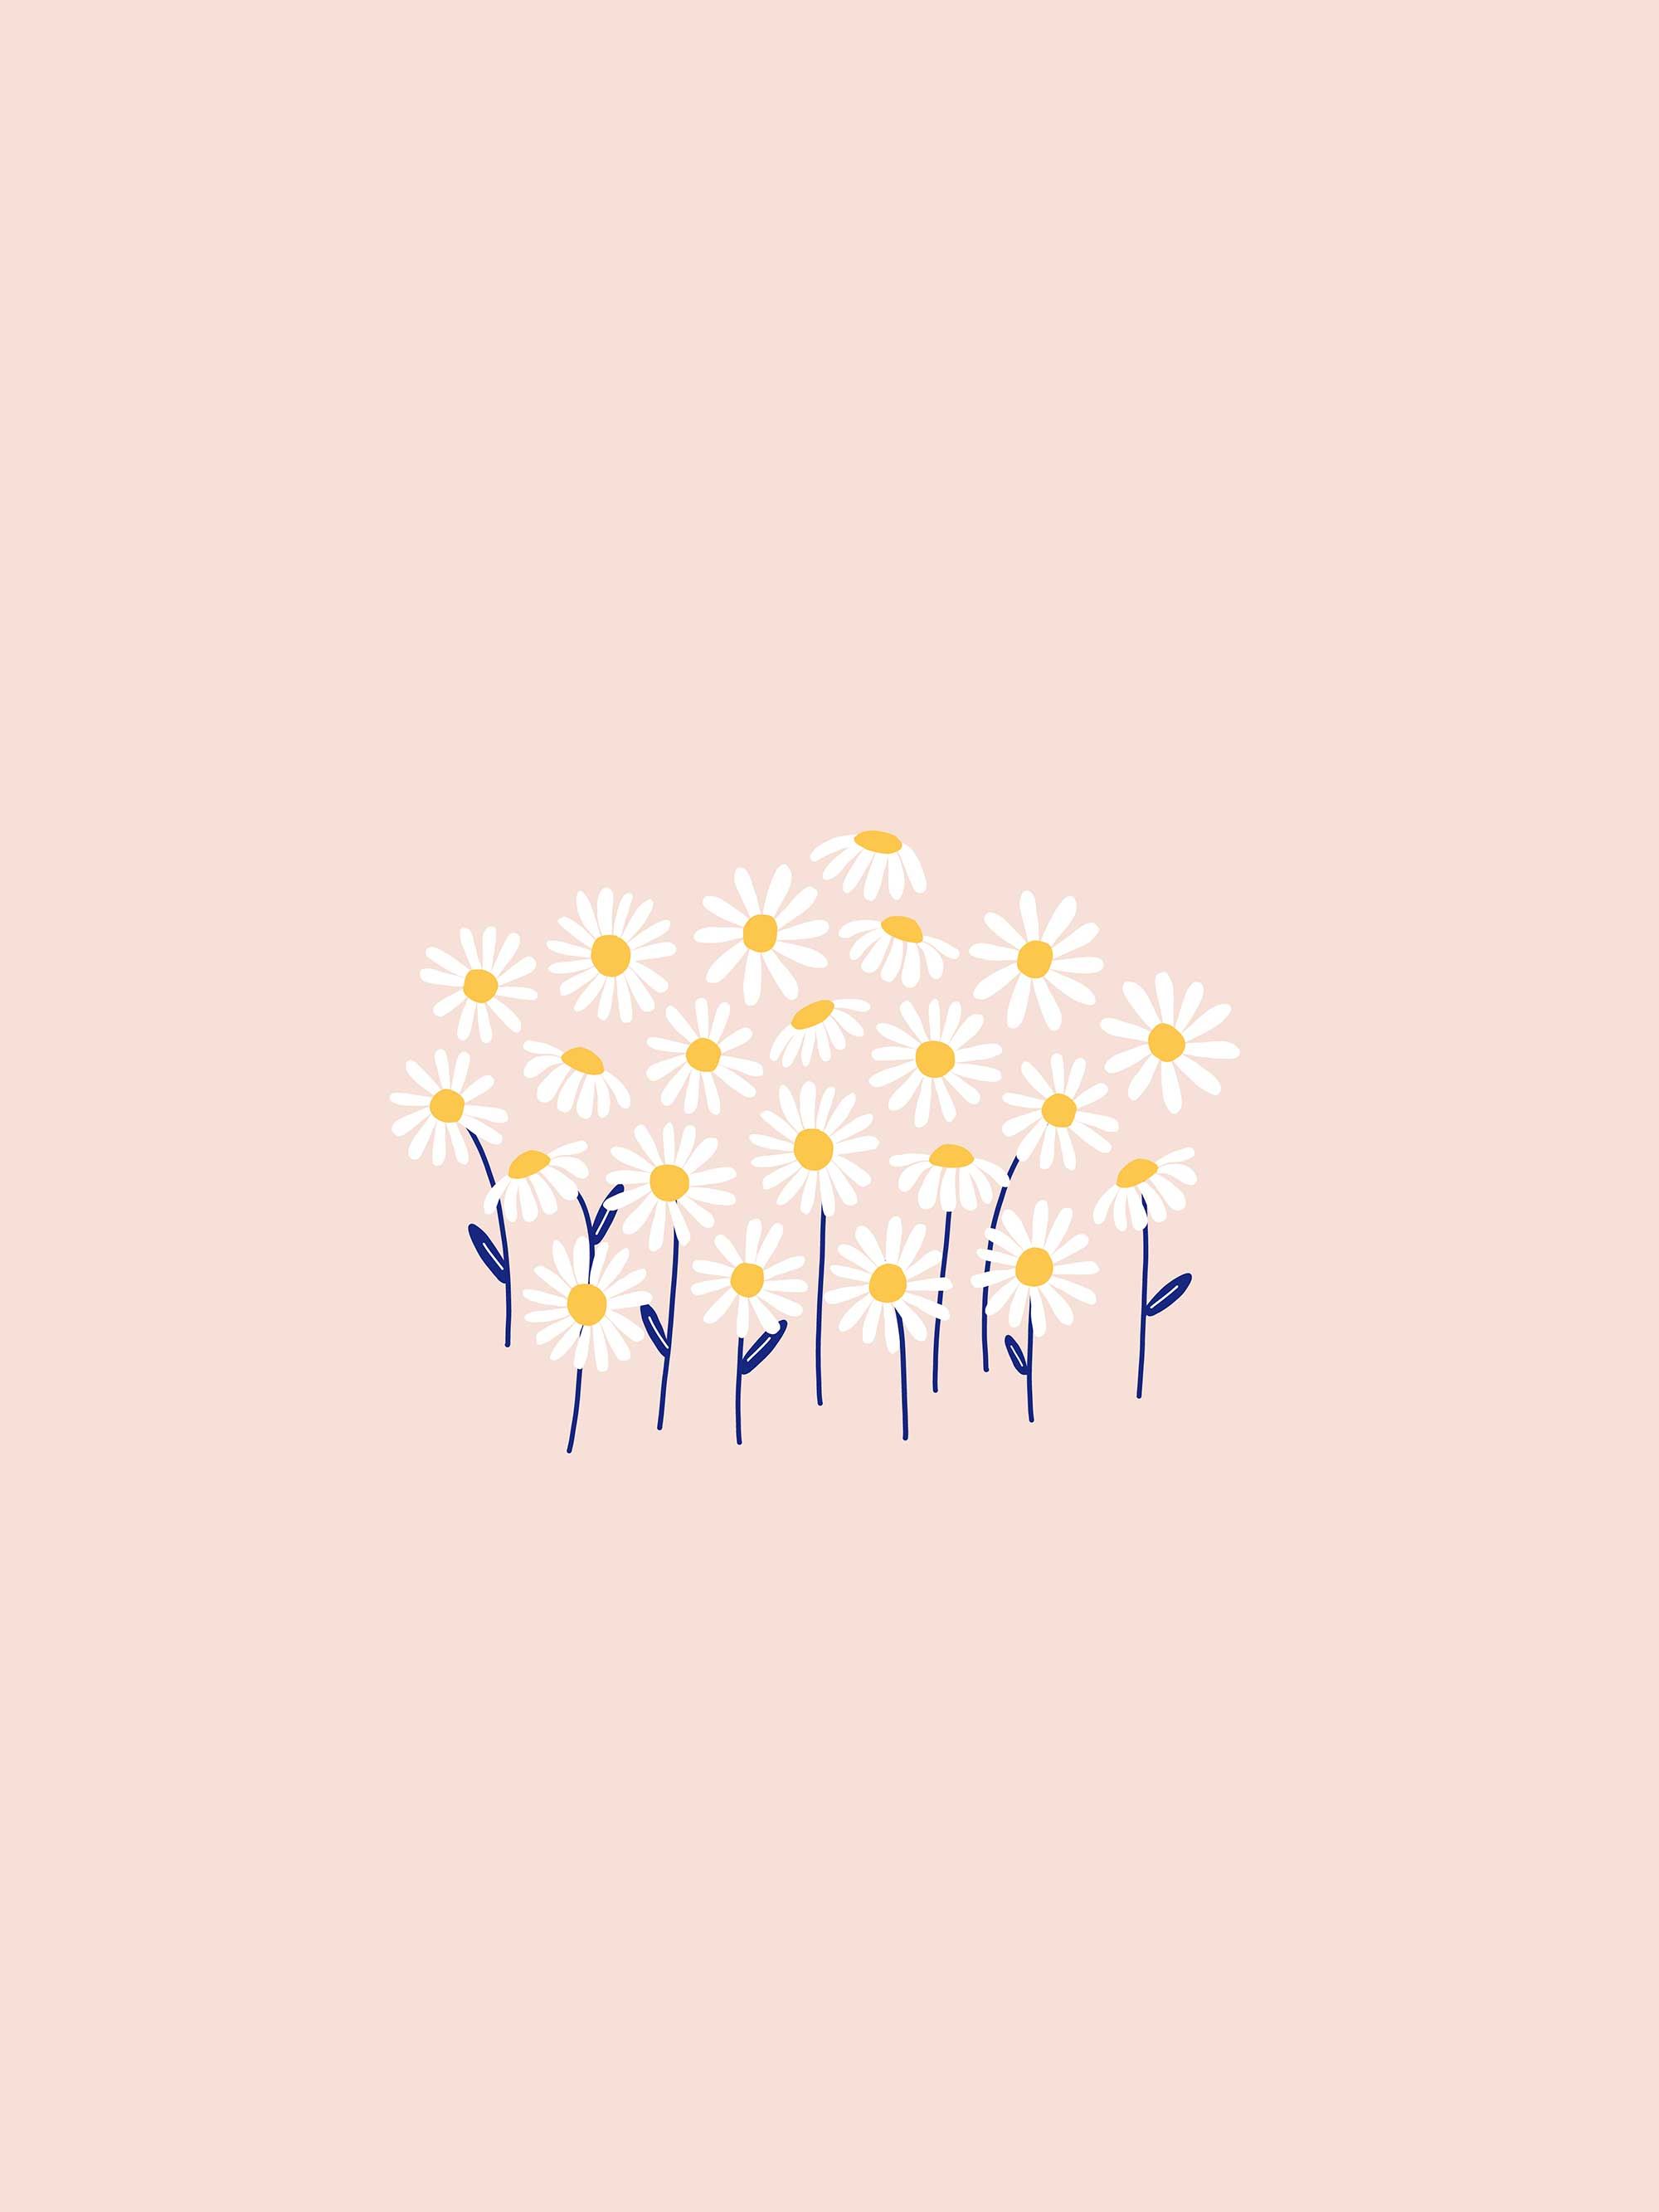 A phone wallpaper of a field of daisies on a pink background - Cute, doodles, pretty, couple, May, daisy